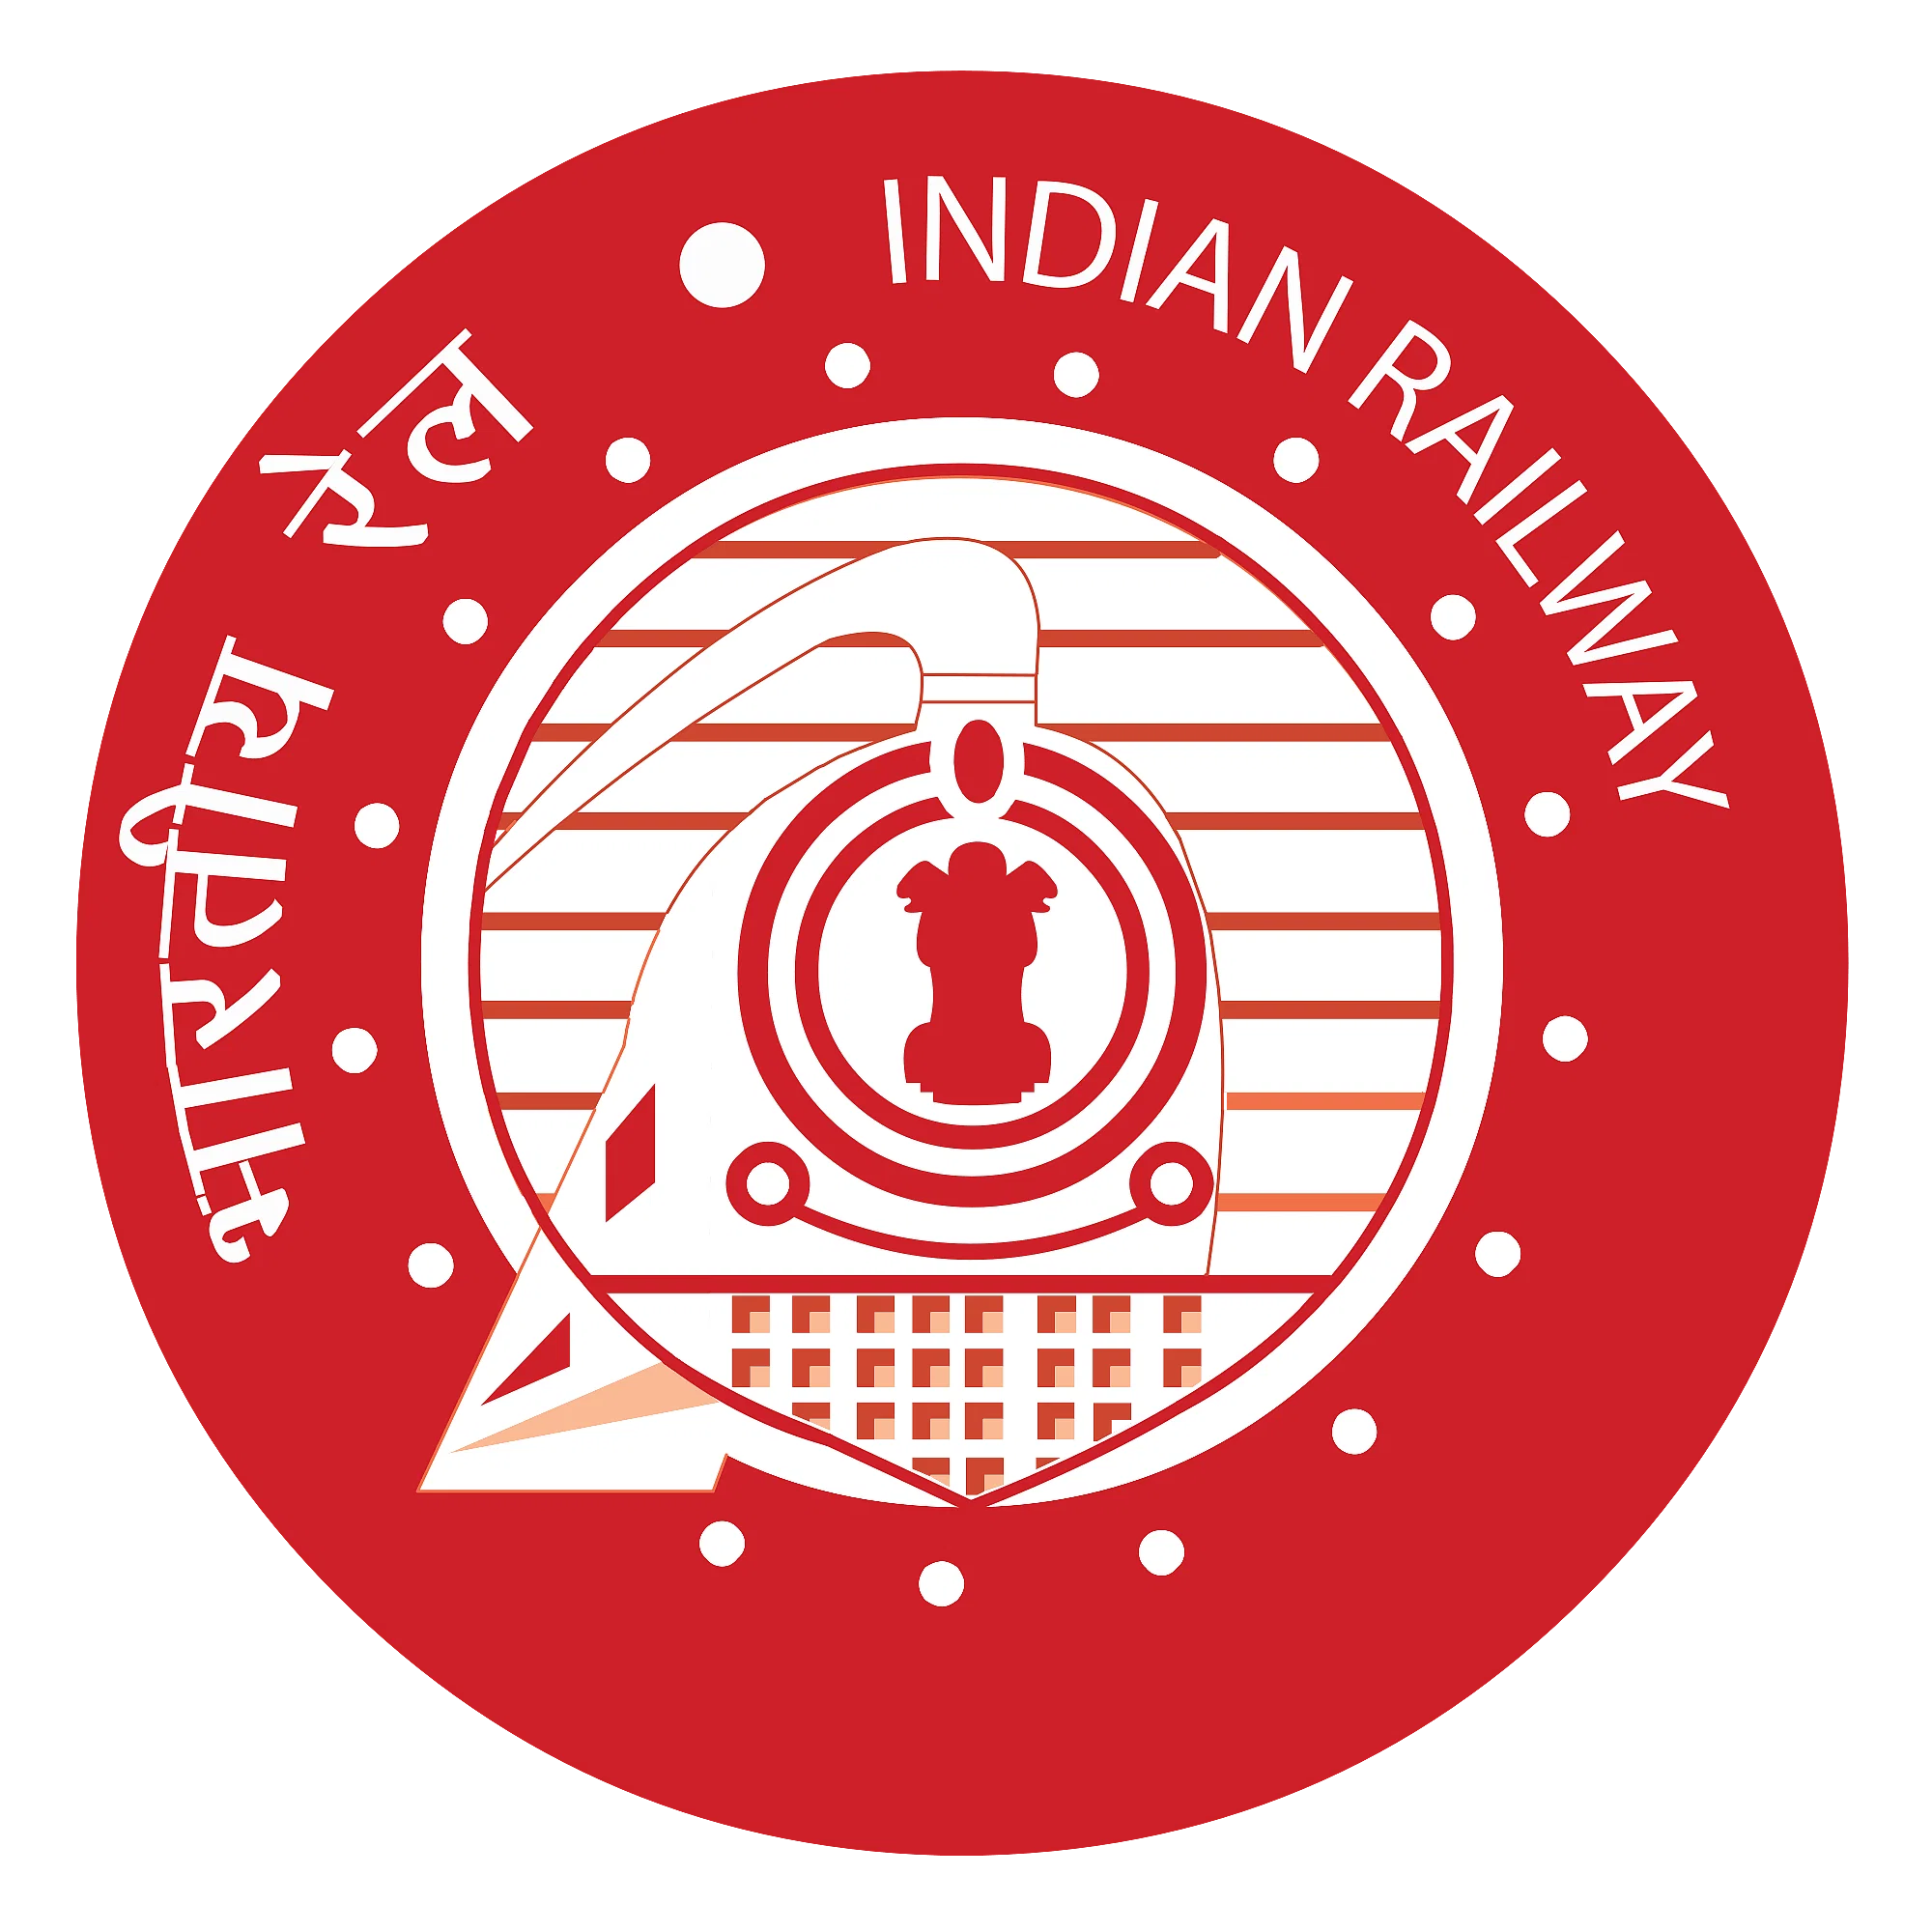 integral coach factory chennai icf released official notification